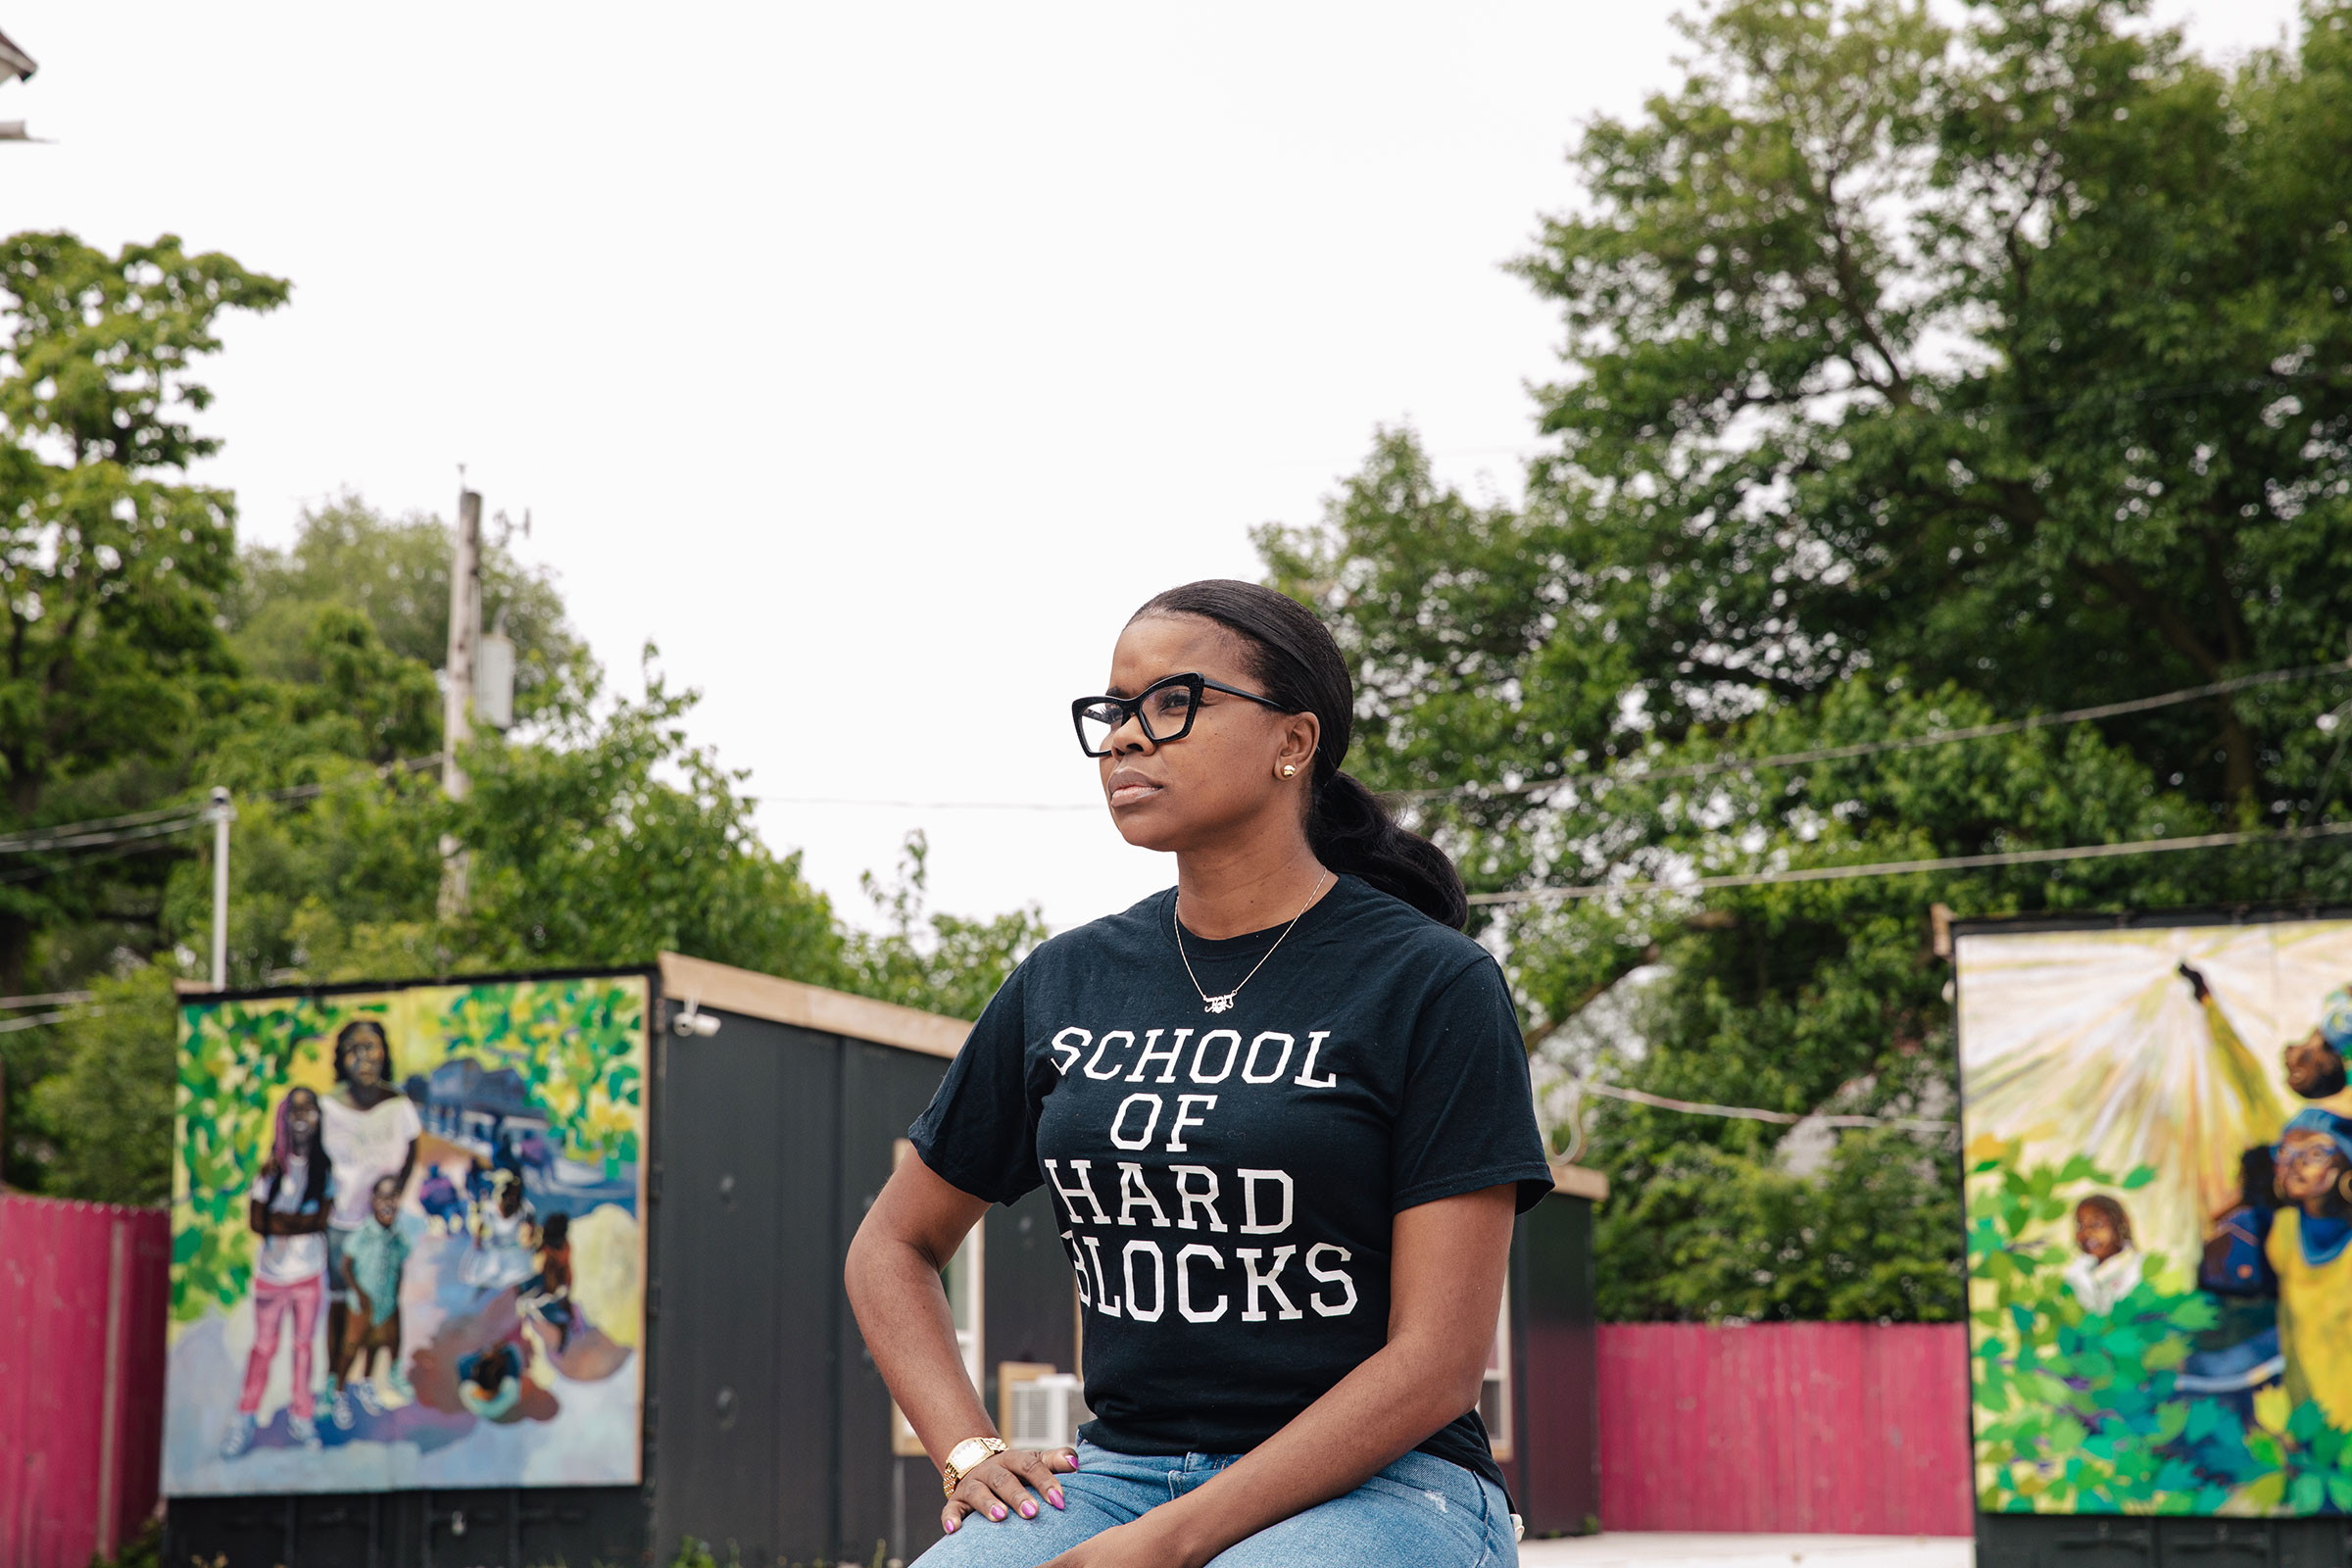 Tamar Manasseh, the president of Mothers Against Senseless Killings, poses for a portrait in Chicago on July 12, 2021. (Nolis Anderson for TIME)